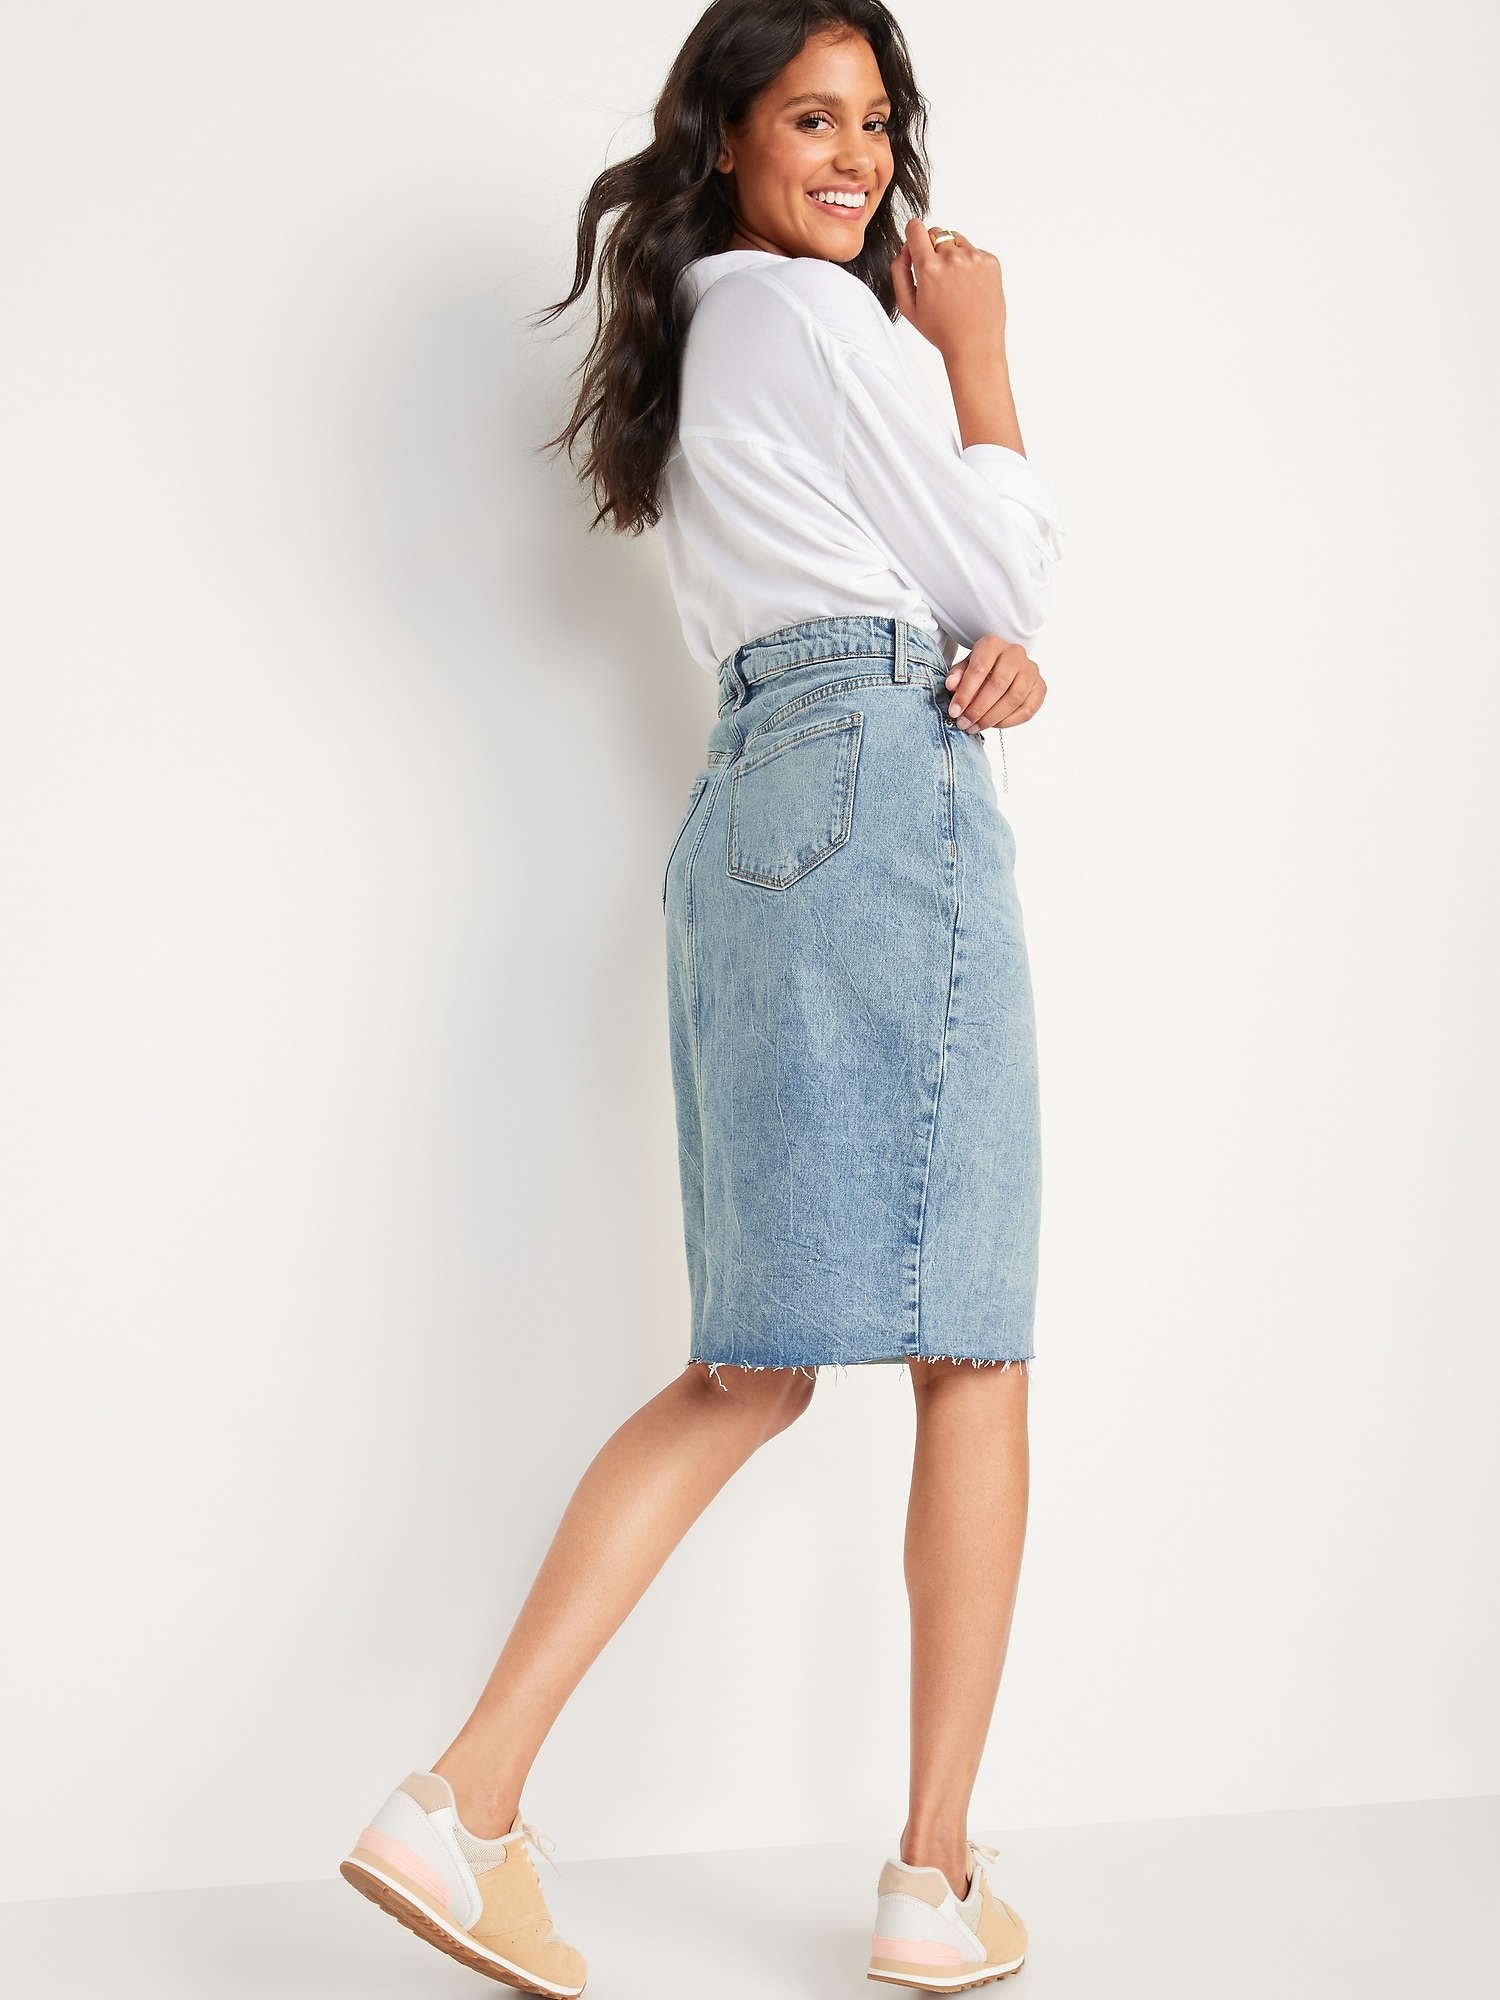 Higher High-Waisted Button-Fly Light-Wash Jean Pencil Skirt | Old Navy